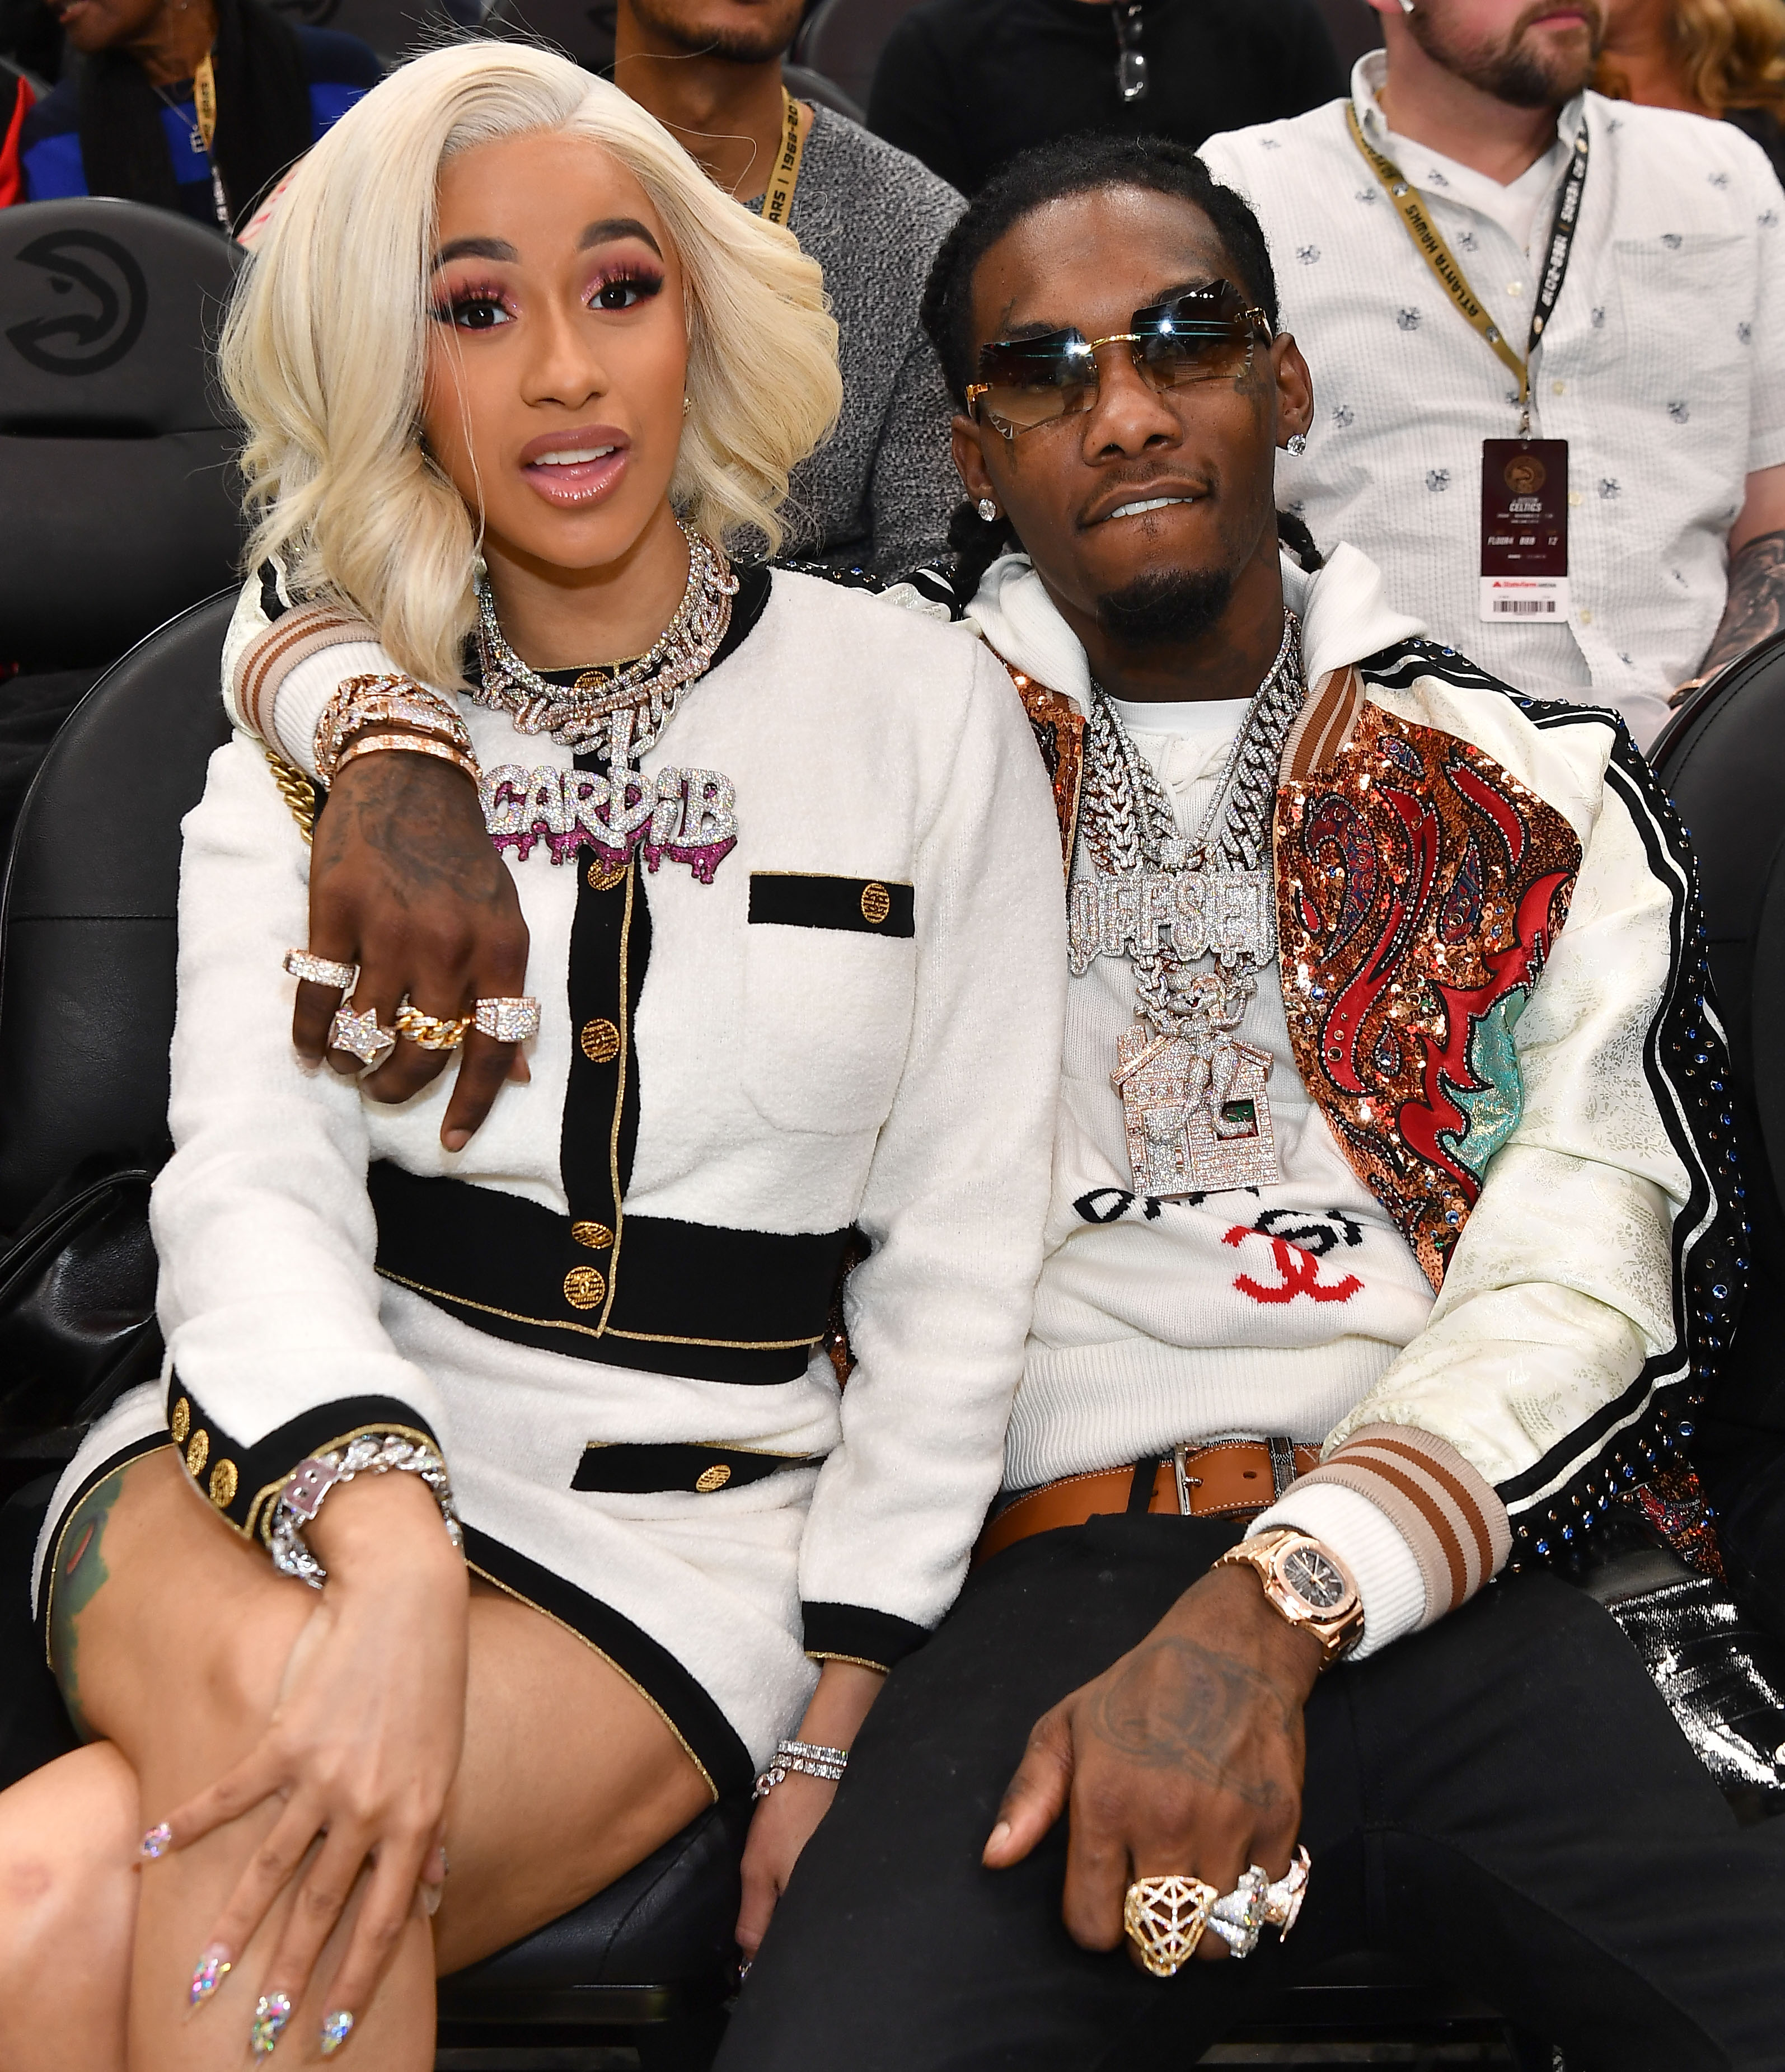 Cardi B has filled for divorce from Offset